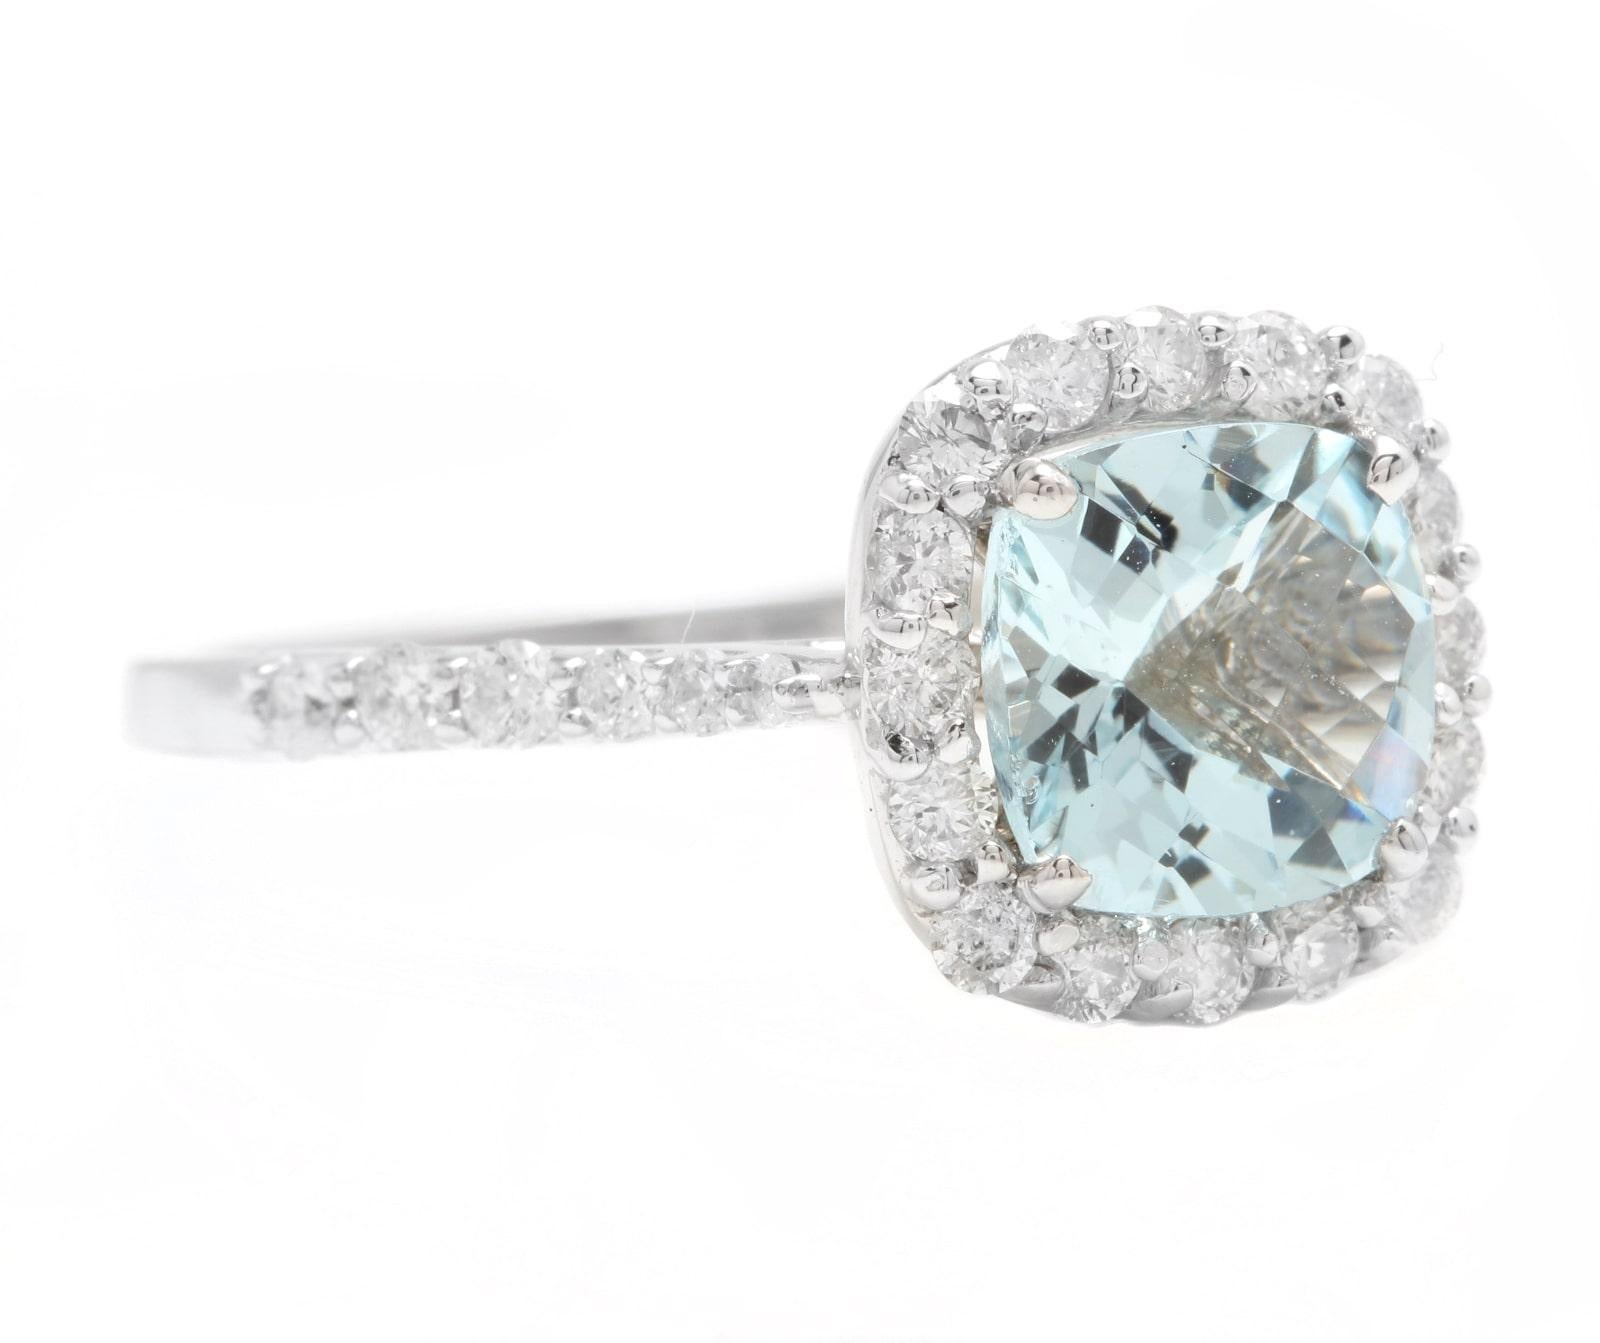 2.05 Carats Natural Aquamarine and Diamond 14K Solid White Gold Ring

Suggested Replacement Value: Approx. $4,000.00

Total Natural Cushion Cut Aquamarine Weights: Approx. 1.50 Carats 

Aquamarine Measures: Approx. 7.30 x 7.30mm

Aquamarine